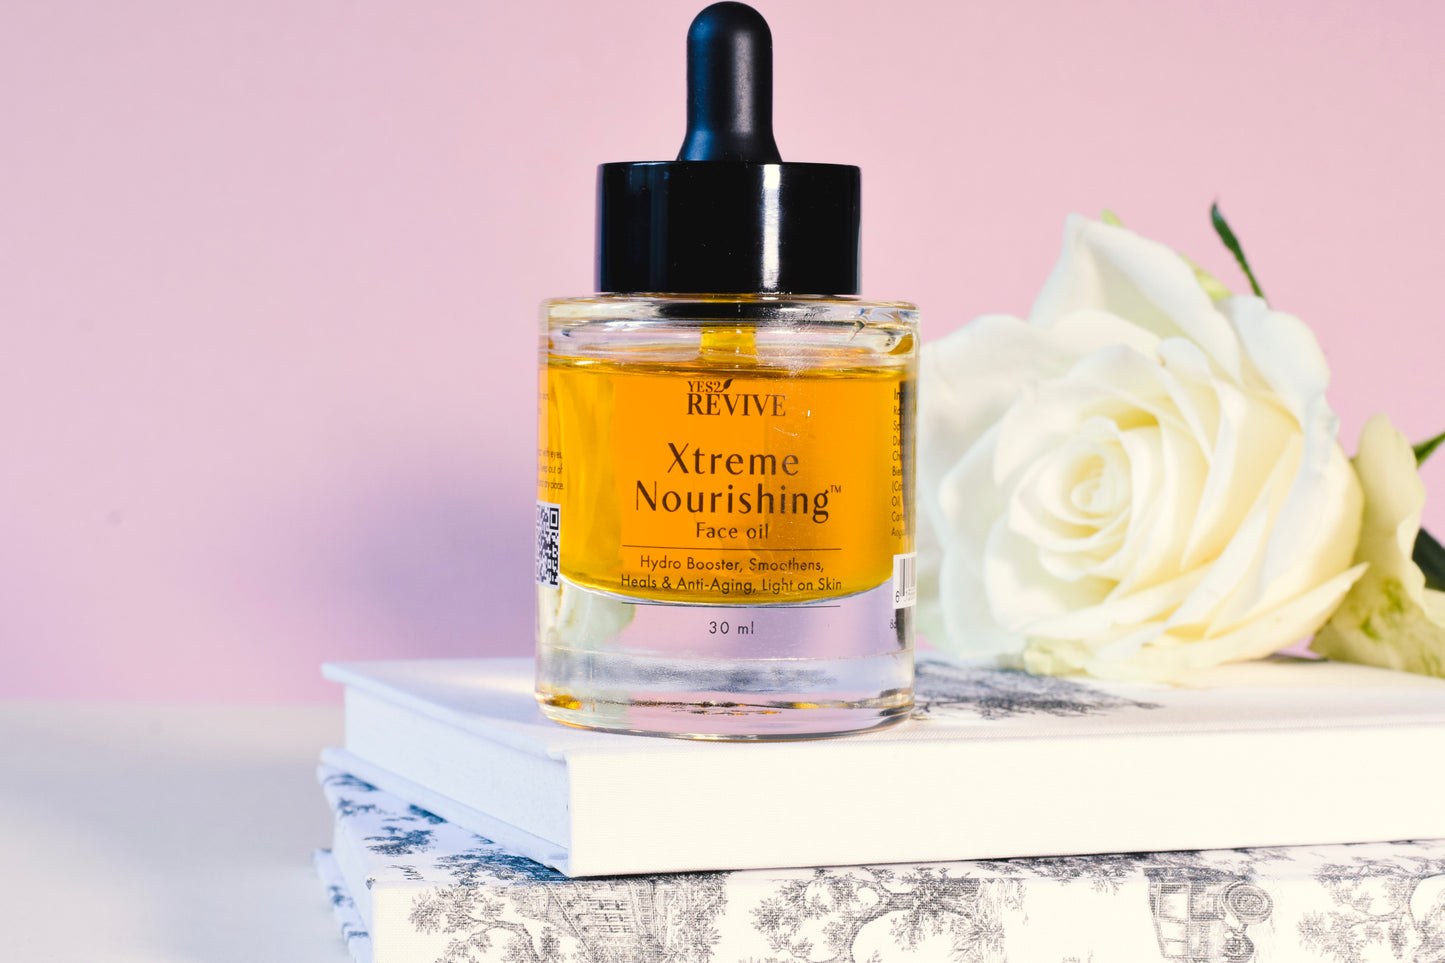 Xtreme Nourishing Face Oil with Vitamin E for Skin